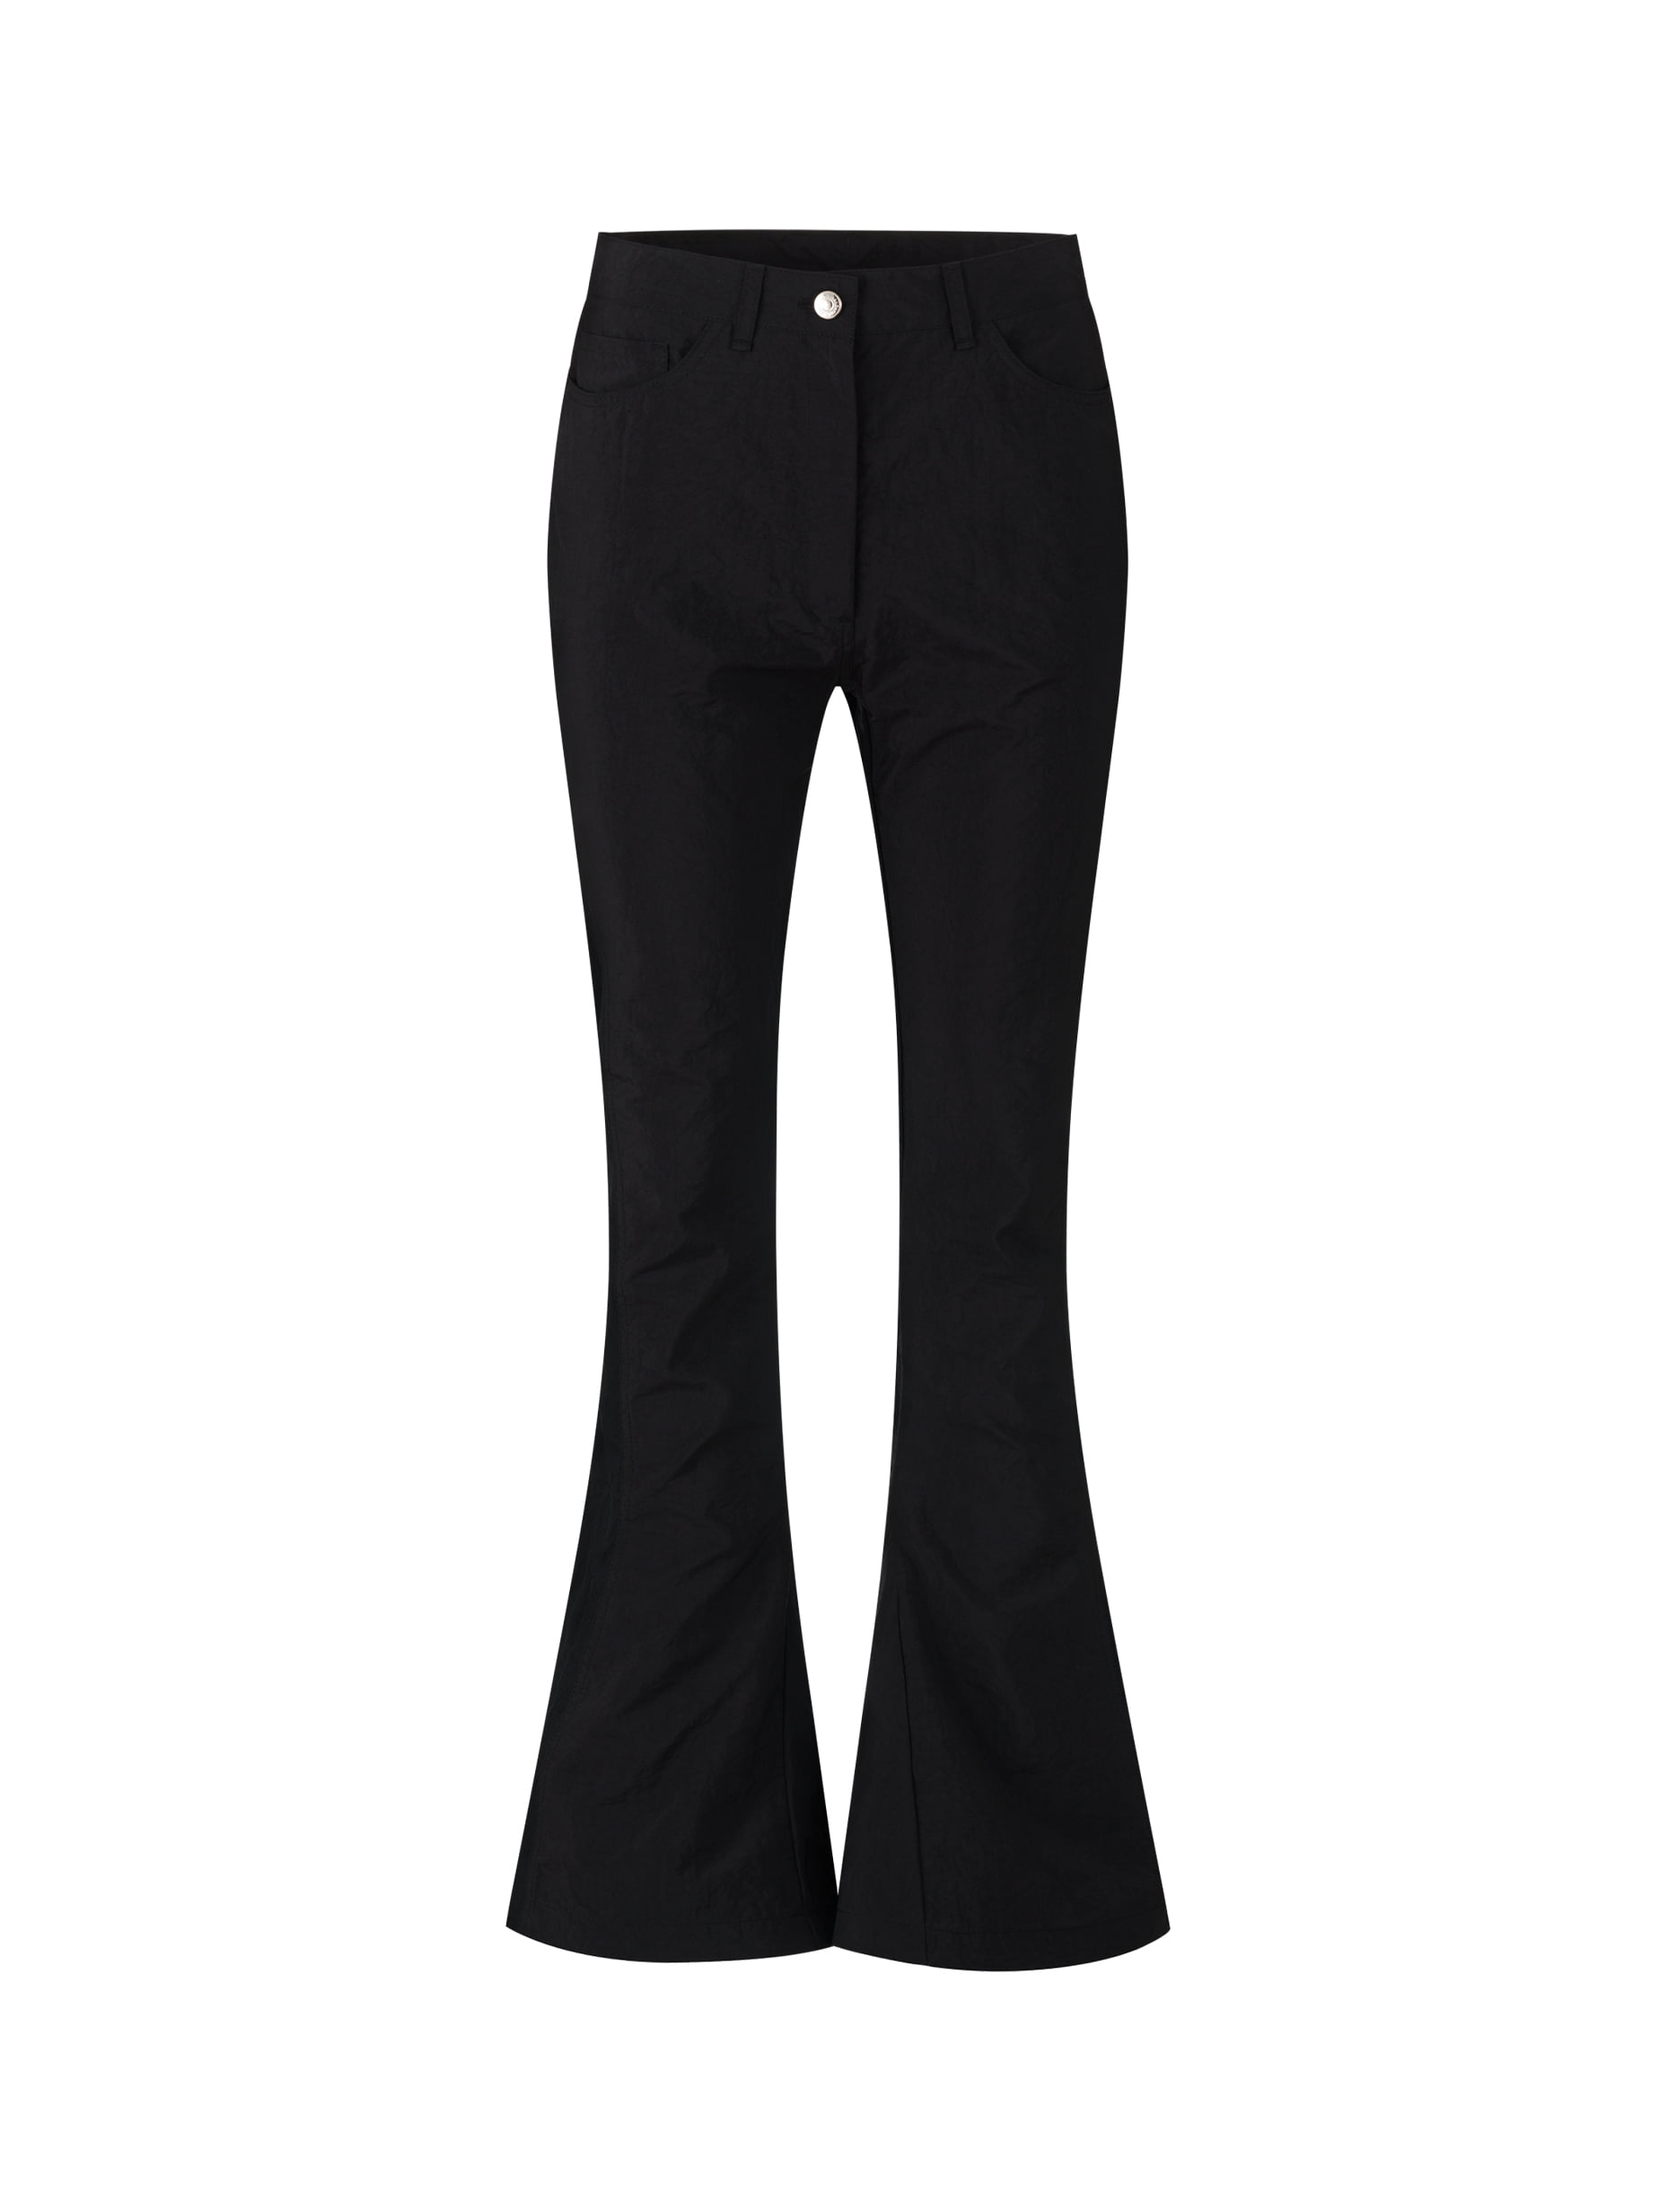 FIVE POCKET FLARED TROUSERS BLACK